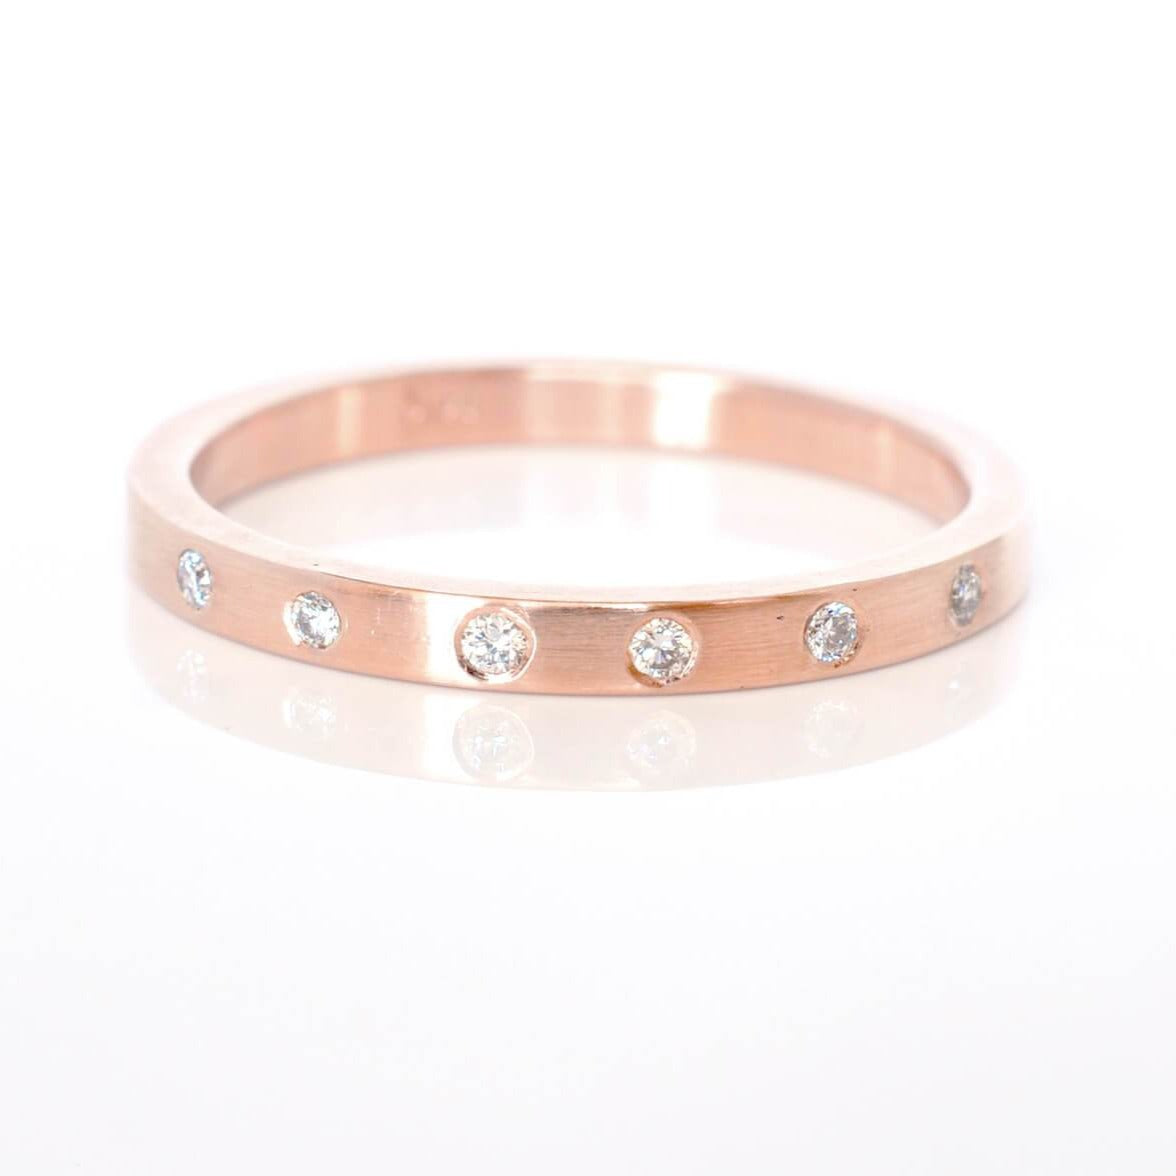 14k red gold eternity band with Canadian mined white diamonds.